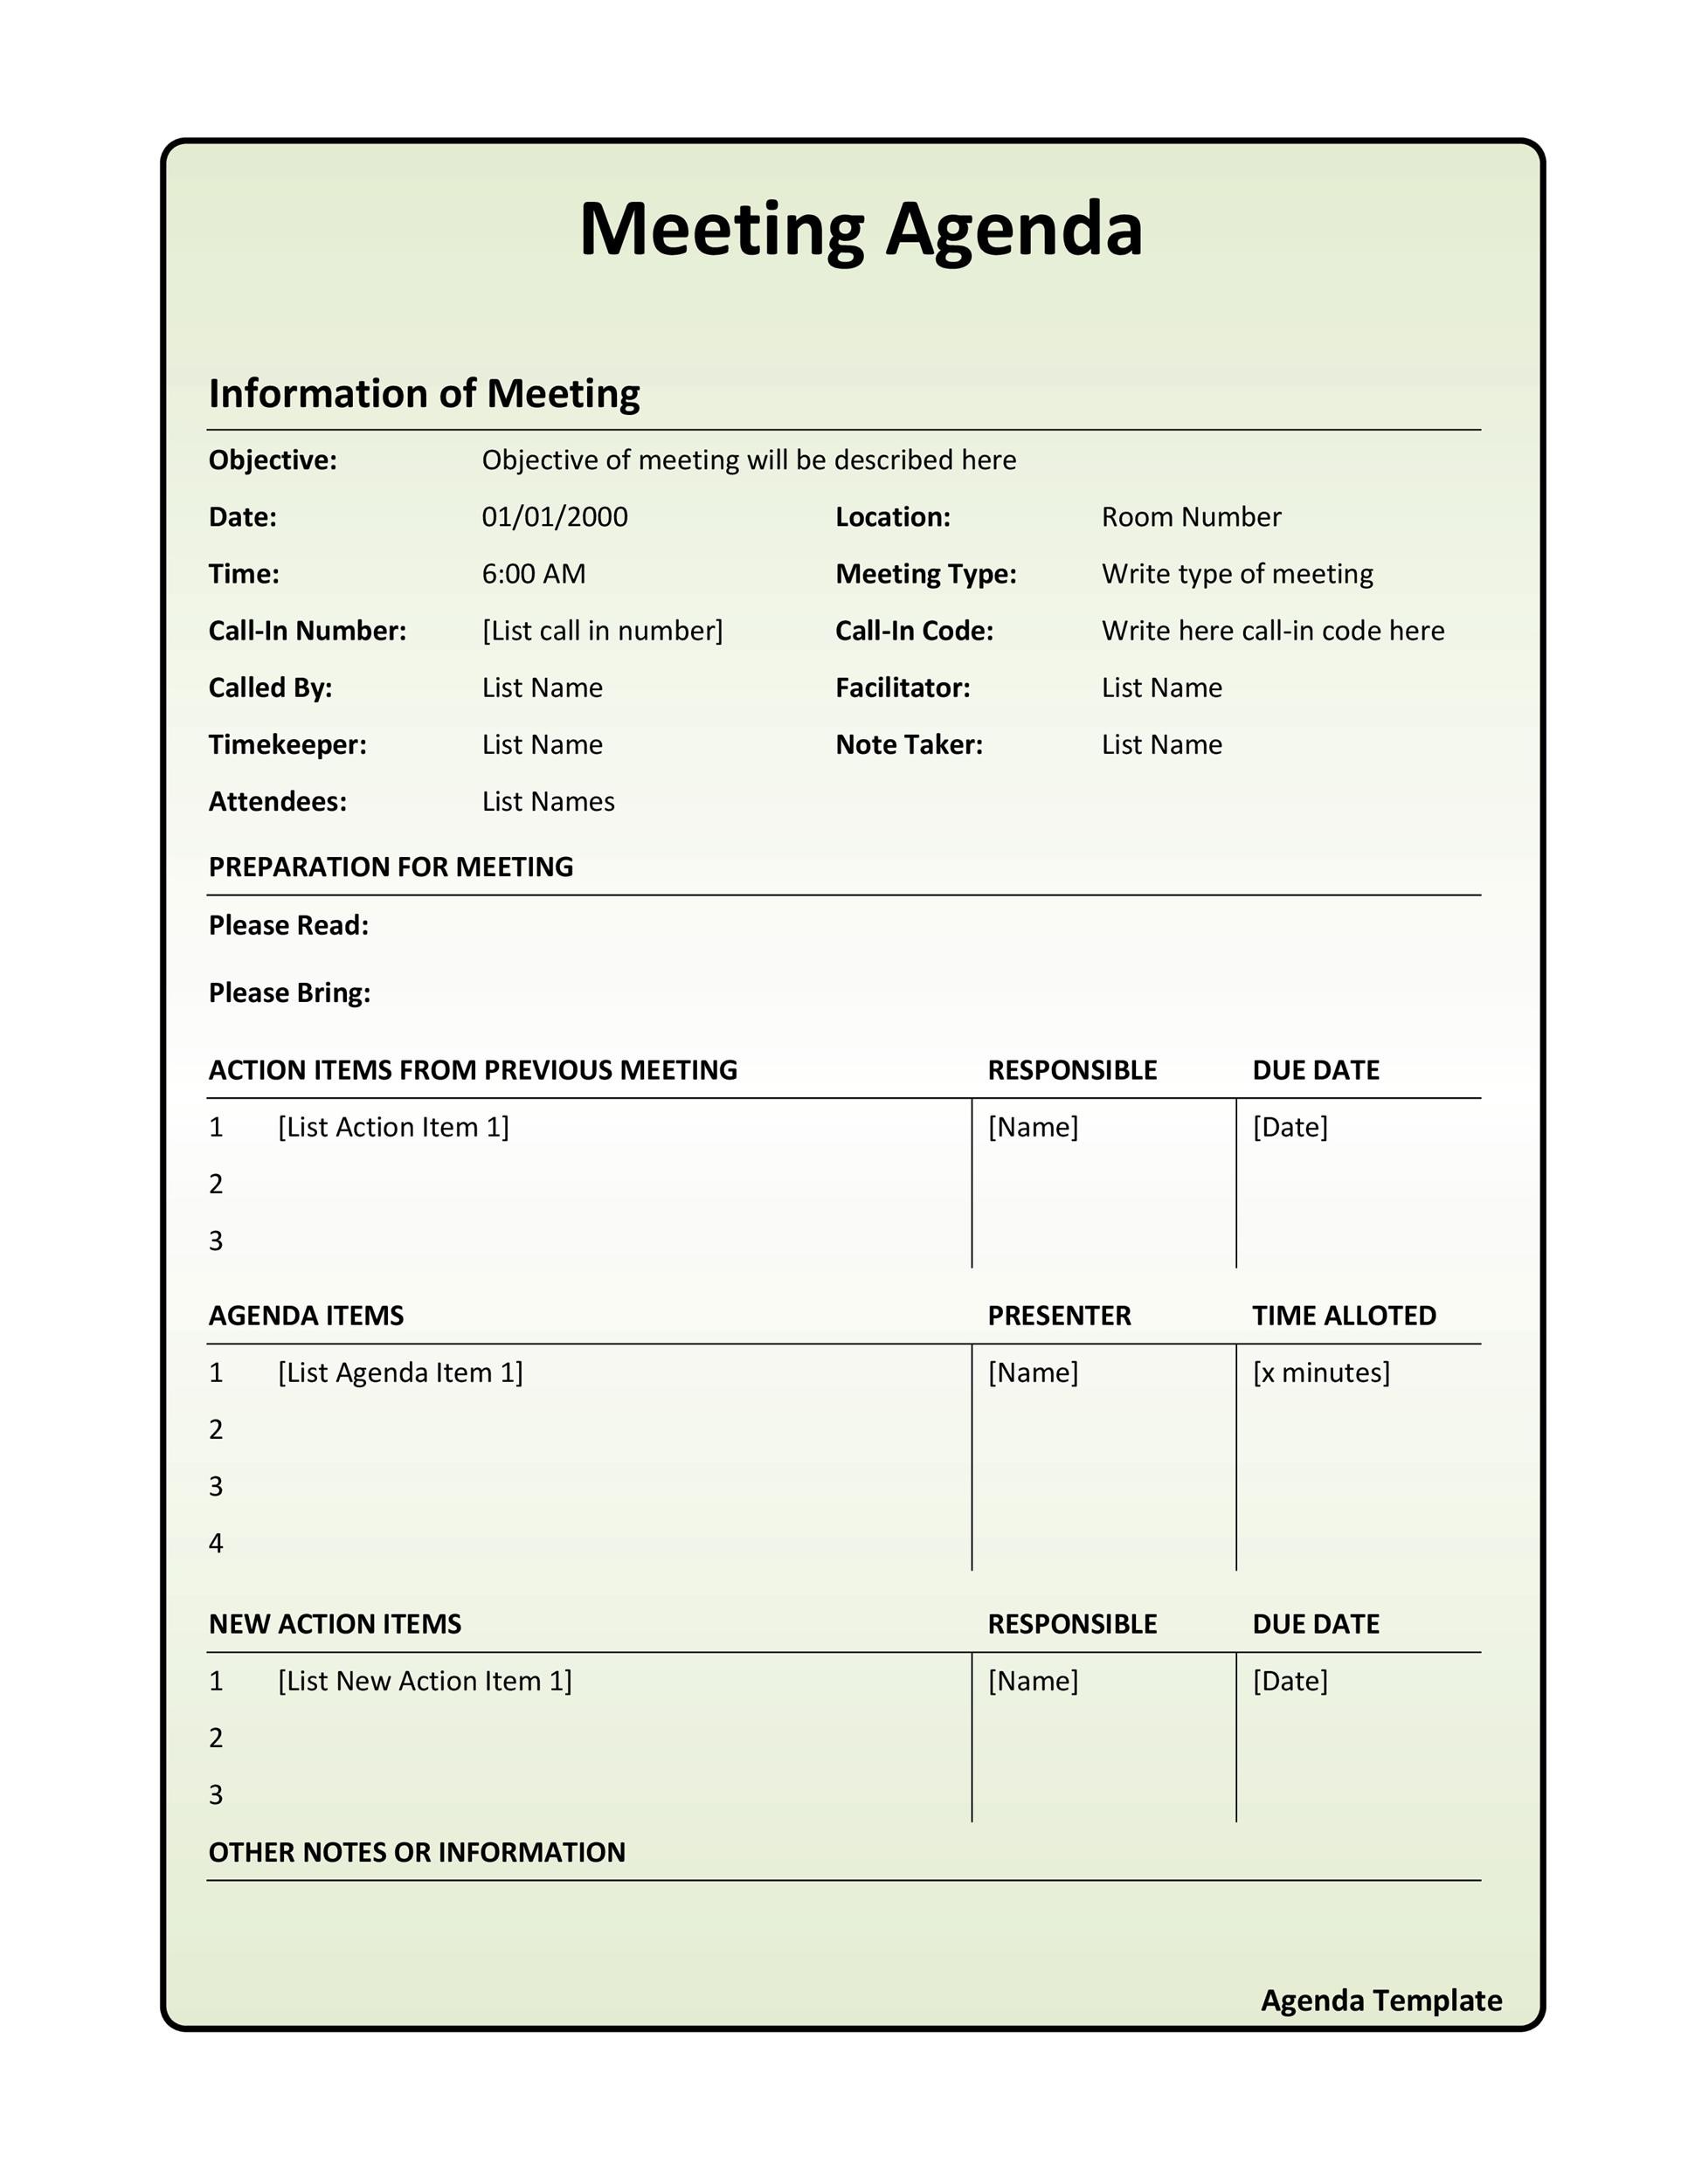 Annual Planning Meeting Agenda Template